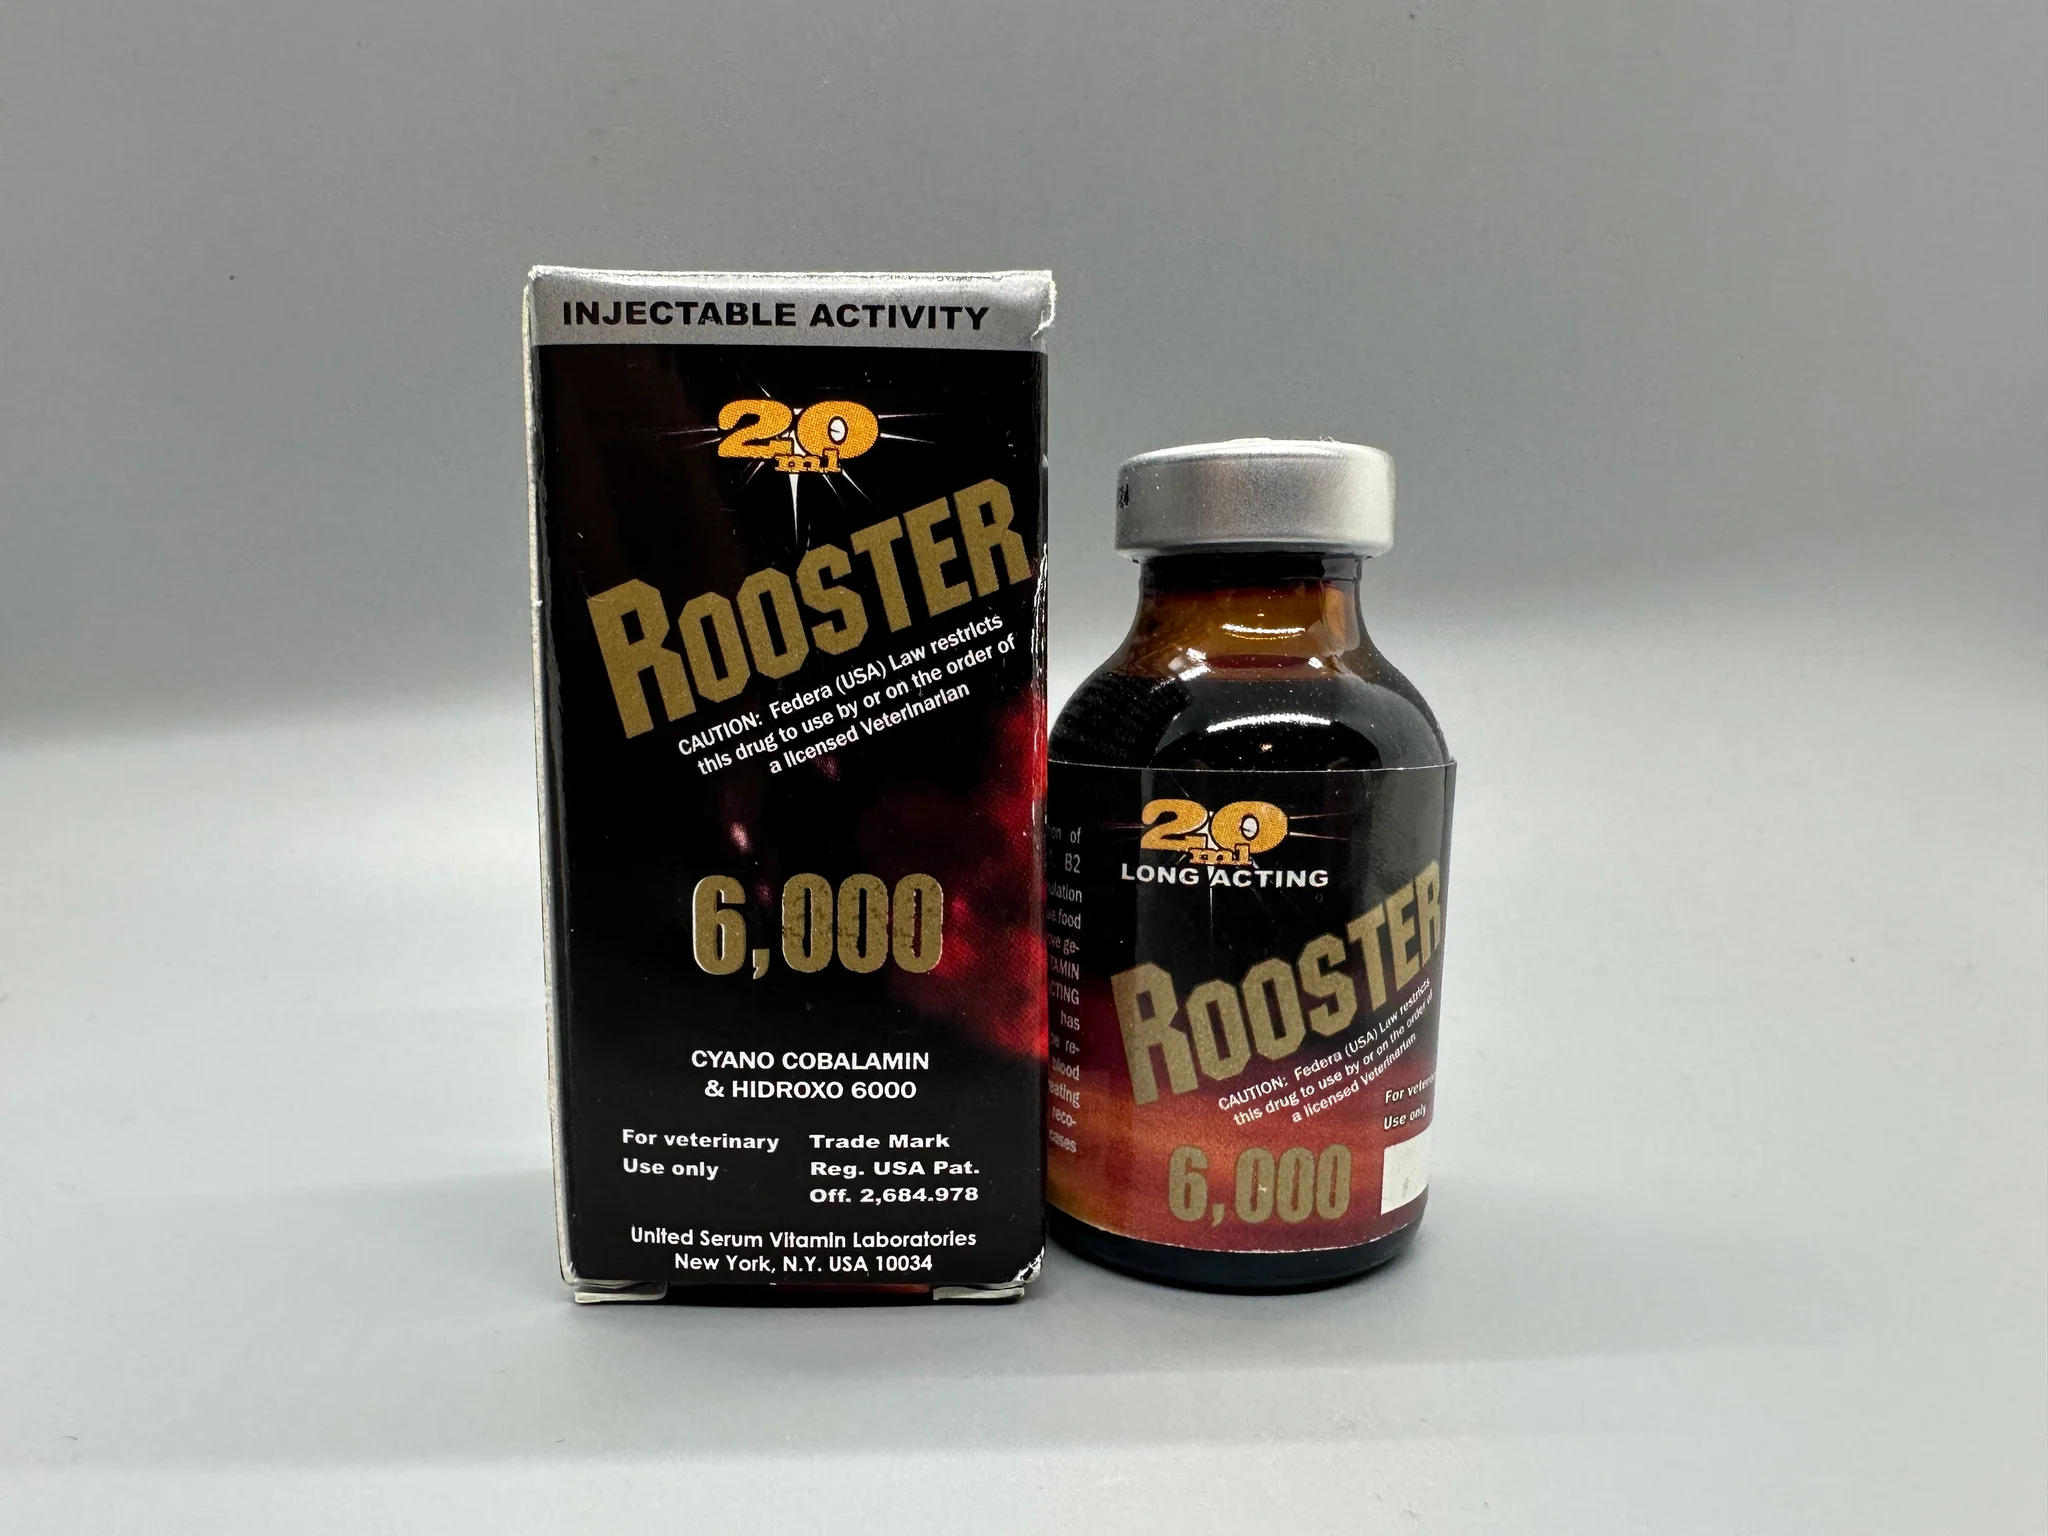 Rooster 6000 Vitamina, Rooster 6000 20ml, Rooster 6000 injection, Vitaminas Rooster 6000, para que sirve injectable 20ml rooster 6000, rooster 6000 dosis, rooster 6000 como se usa, rooster 6000 + b15, vitamina rooster 6000 para gallos, rooster 6000 precio, vitamax 6000 para que sirve, Rooster 6000 veterinary injection, Rooster 6000 veterinary medicine ,